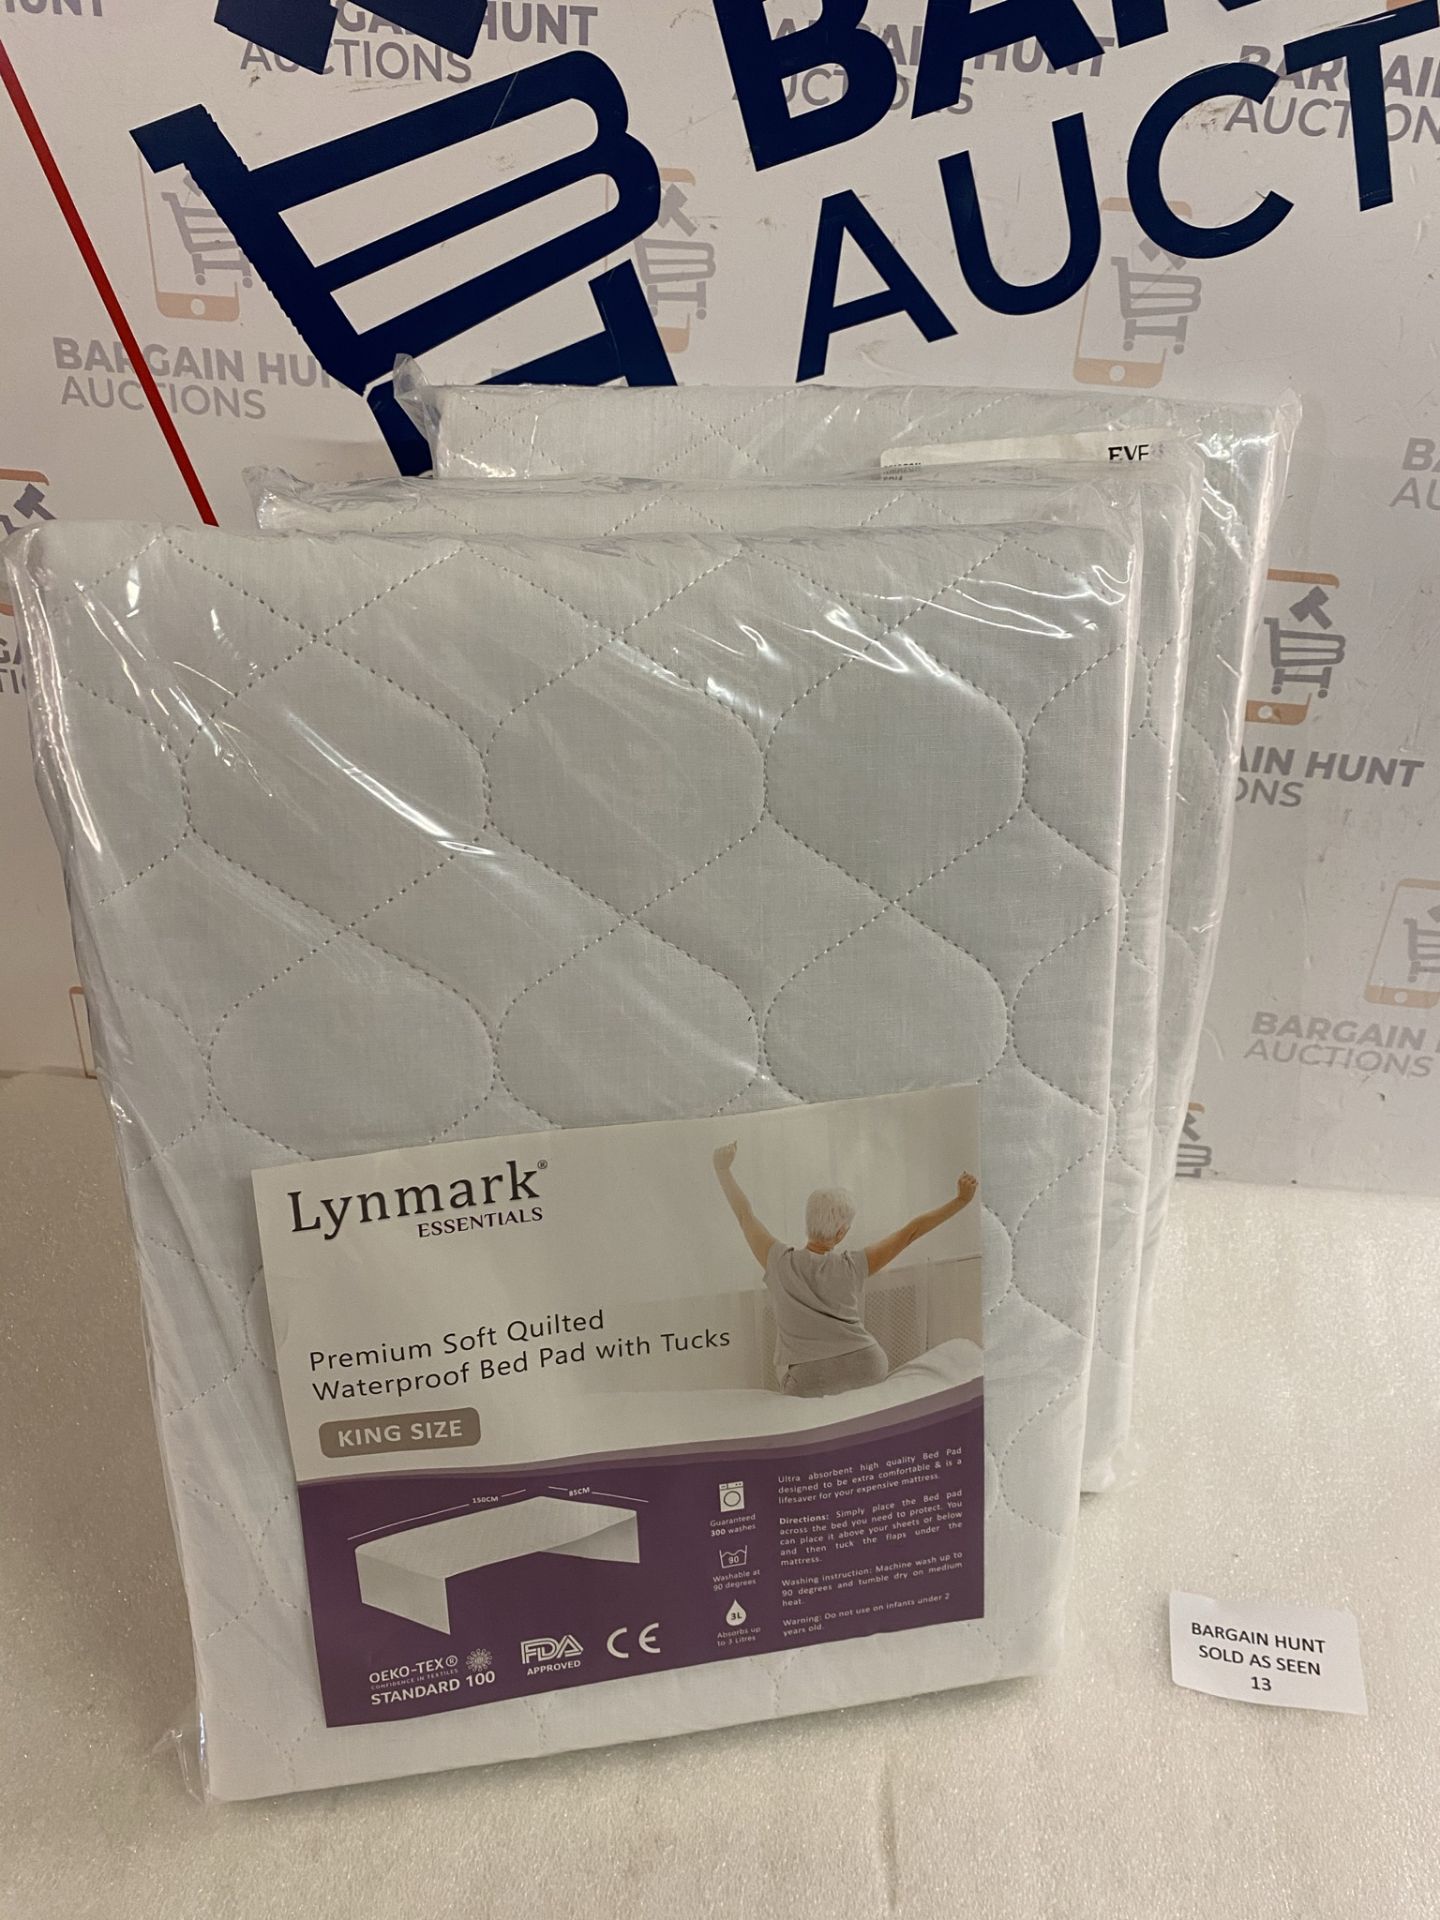 RRP £60 Set of 3 x Lynmark Premium Soft Quilted Waterproof Bed Pad with Tucks, King Size